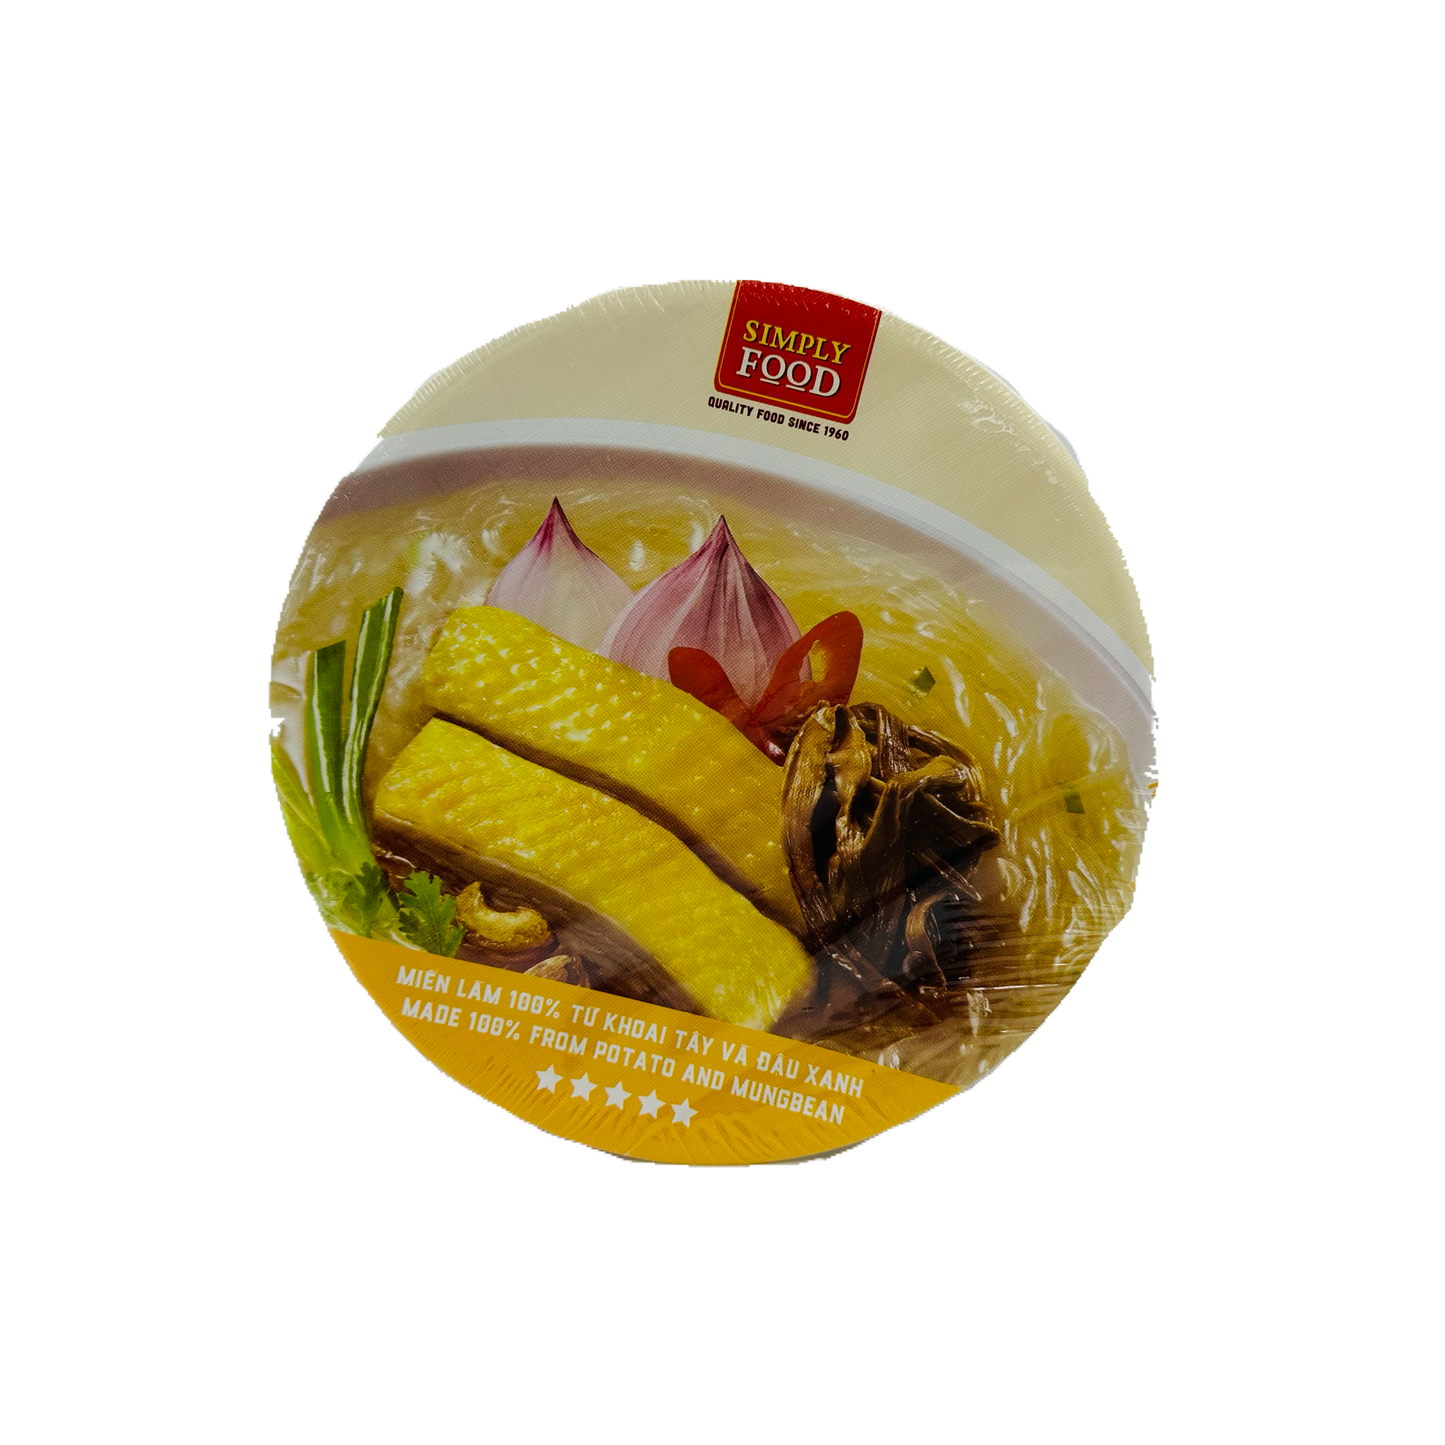 Simply Food Mien Mang Ga Chicken Vermicelli With Bamboo Shoot